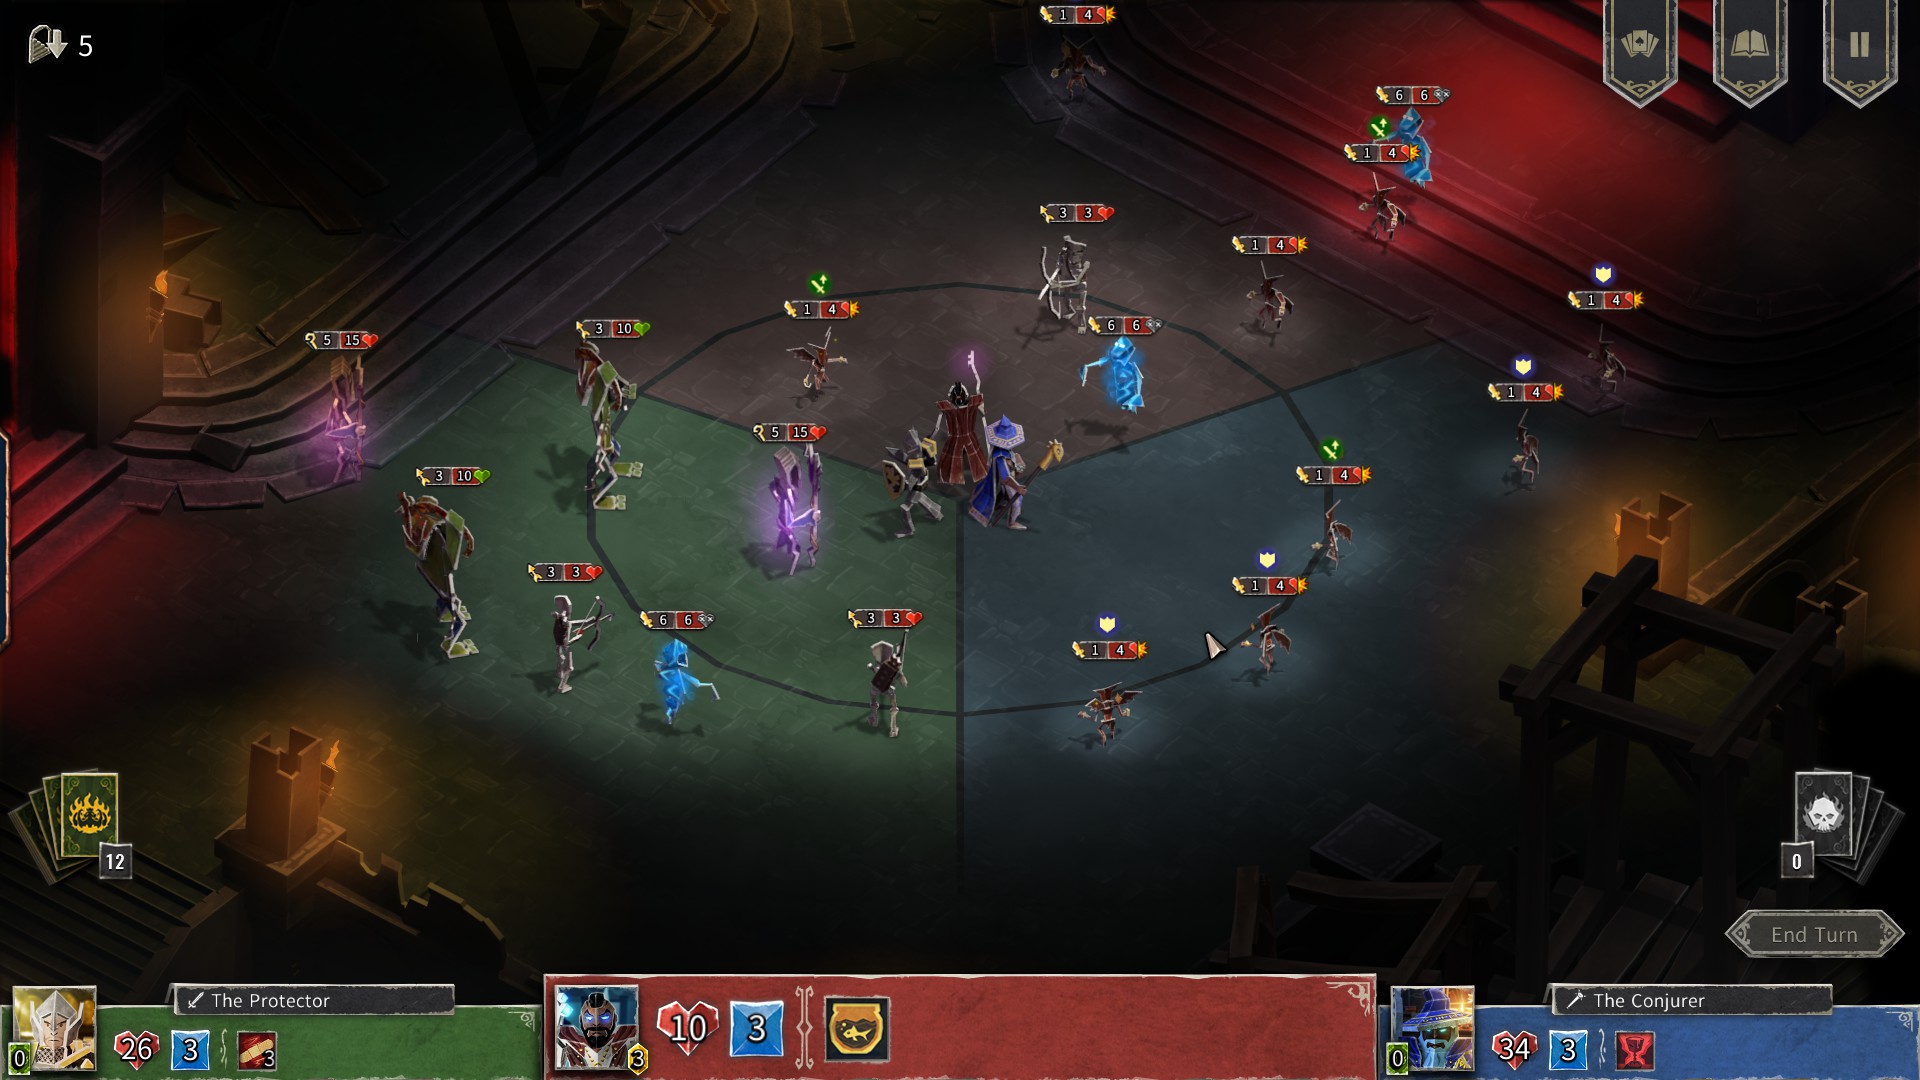 The Hellcard game area is seen. The player's main character and two companions stand in the middle, surrounded by enemies. The zone is split into far and near zones.